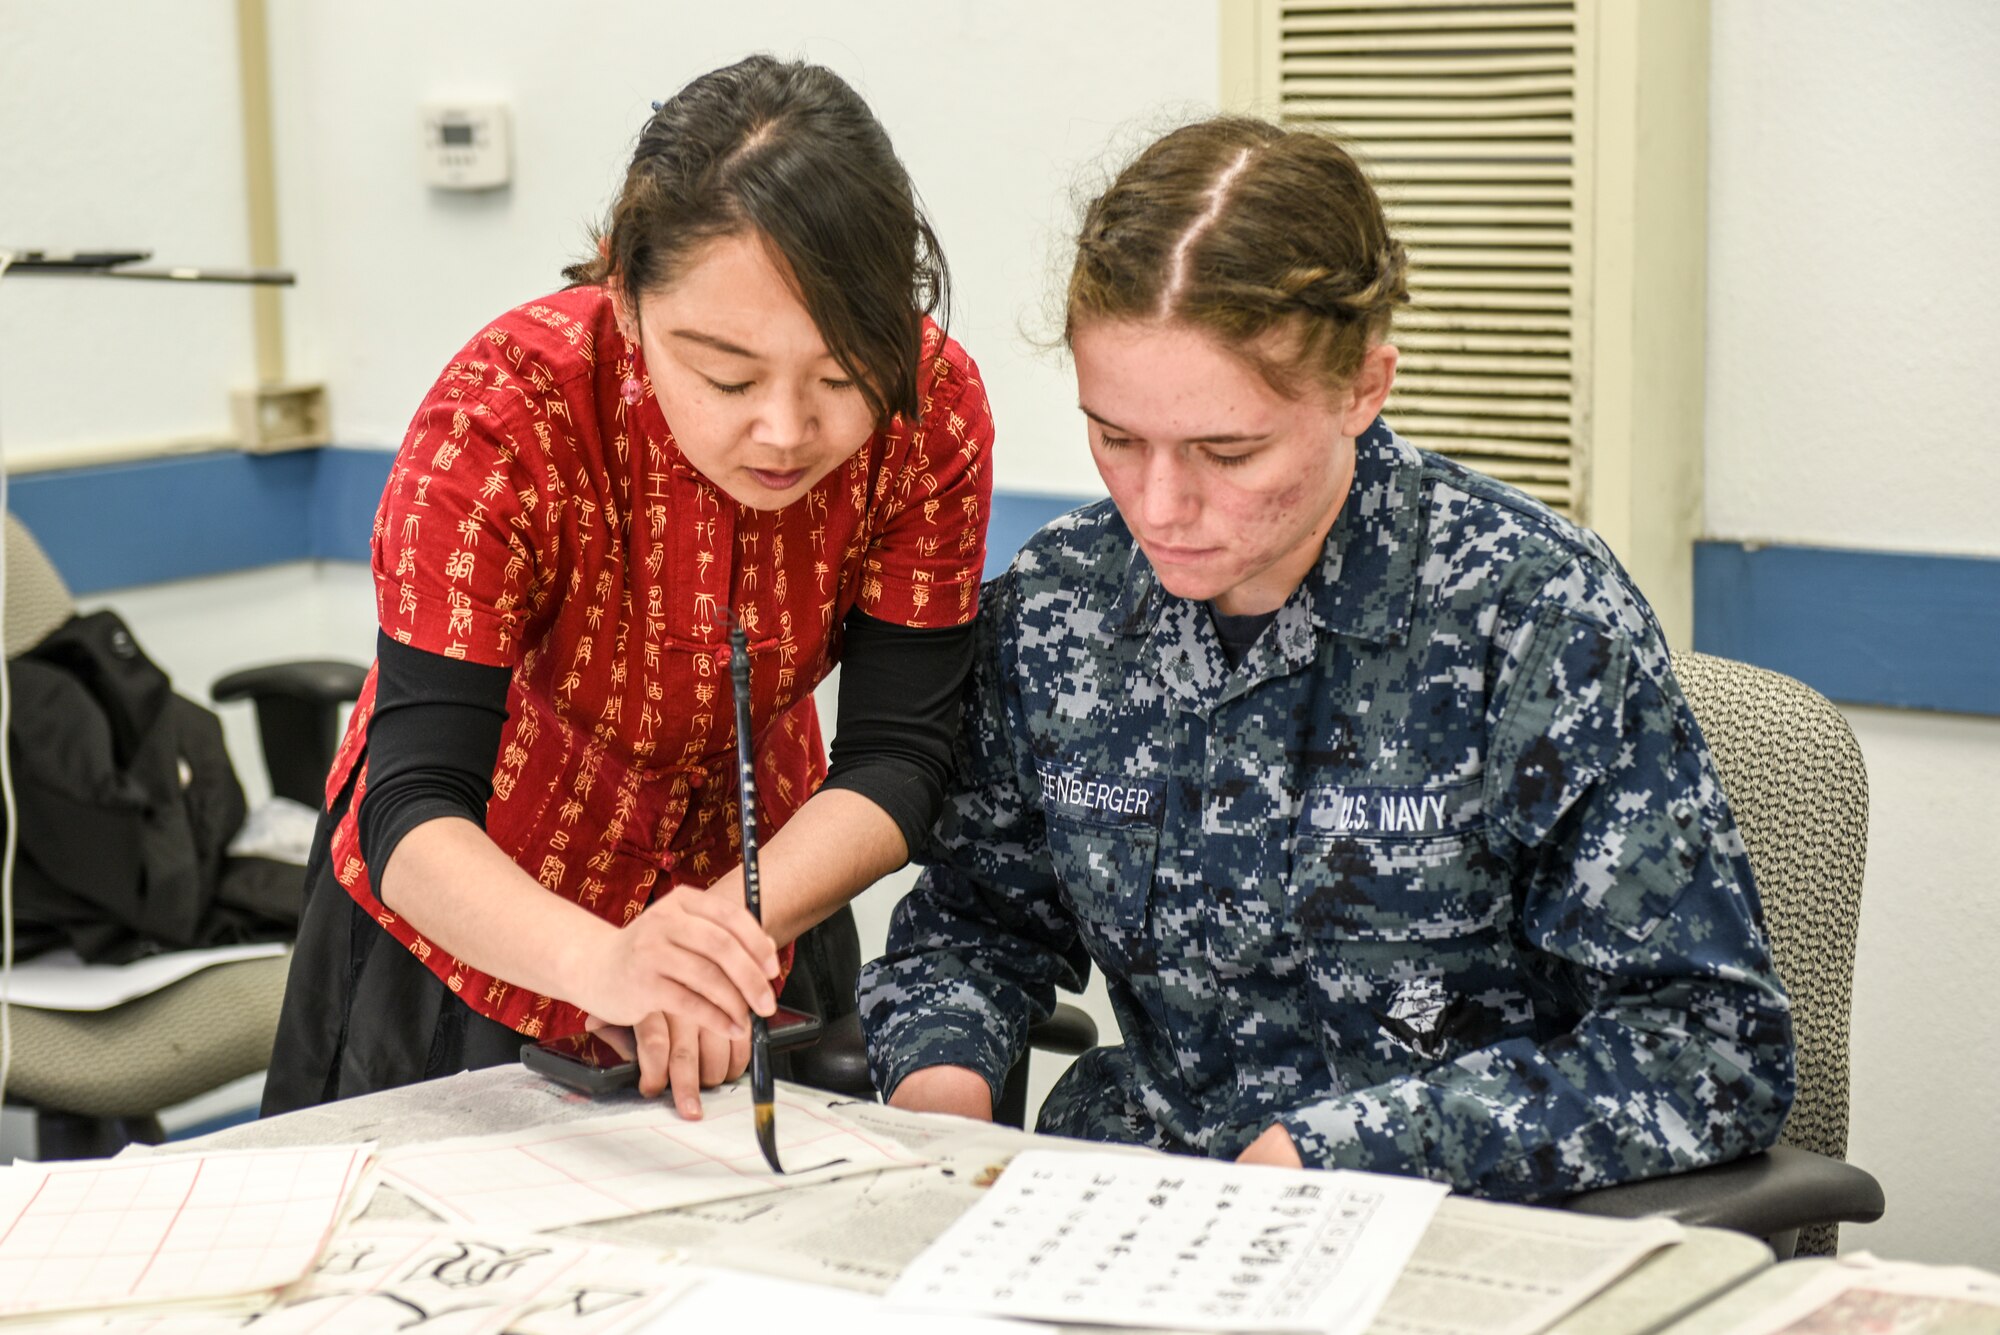 Cong Li, Defense Language Institute assistant Chinese professor, demonstrates how to write Chinese characters to Seaman Madelyn Nizenberger, Navy detachment trainee, during Defense Language Institute Foreign Language Center Language Day at the Presideo of Monterey, California, May 11, 2018. In addition to dances, music, and cultural tents, Language Day also included classroom demonstrations.